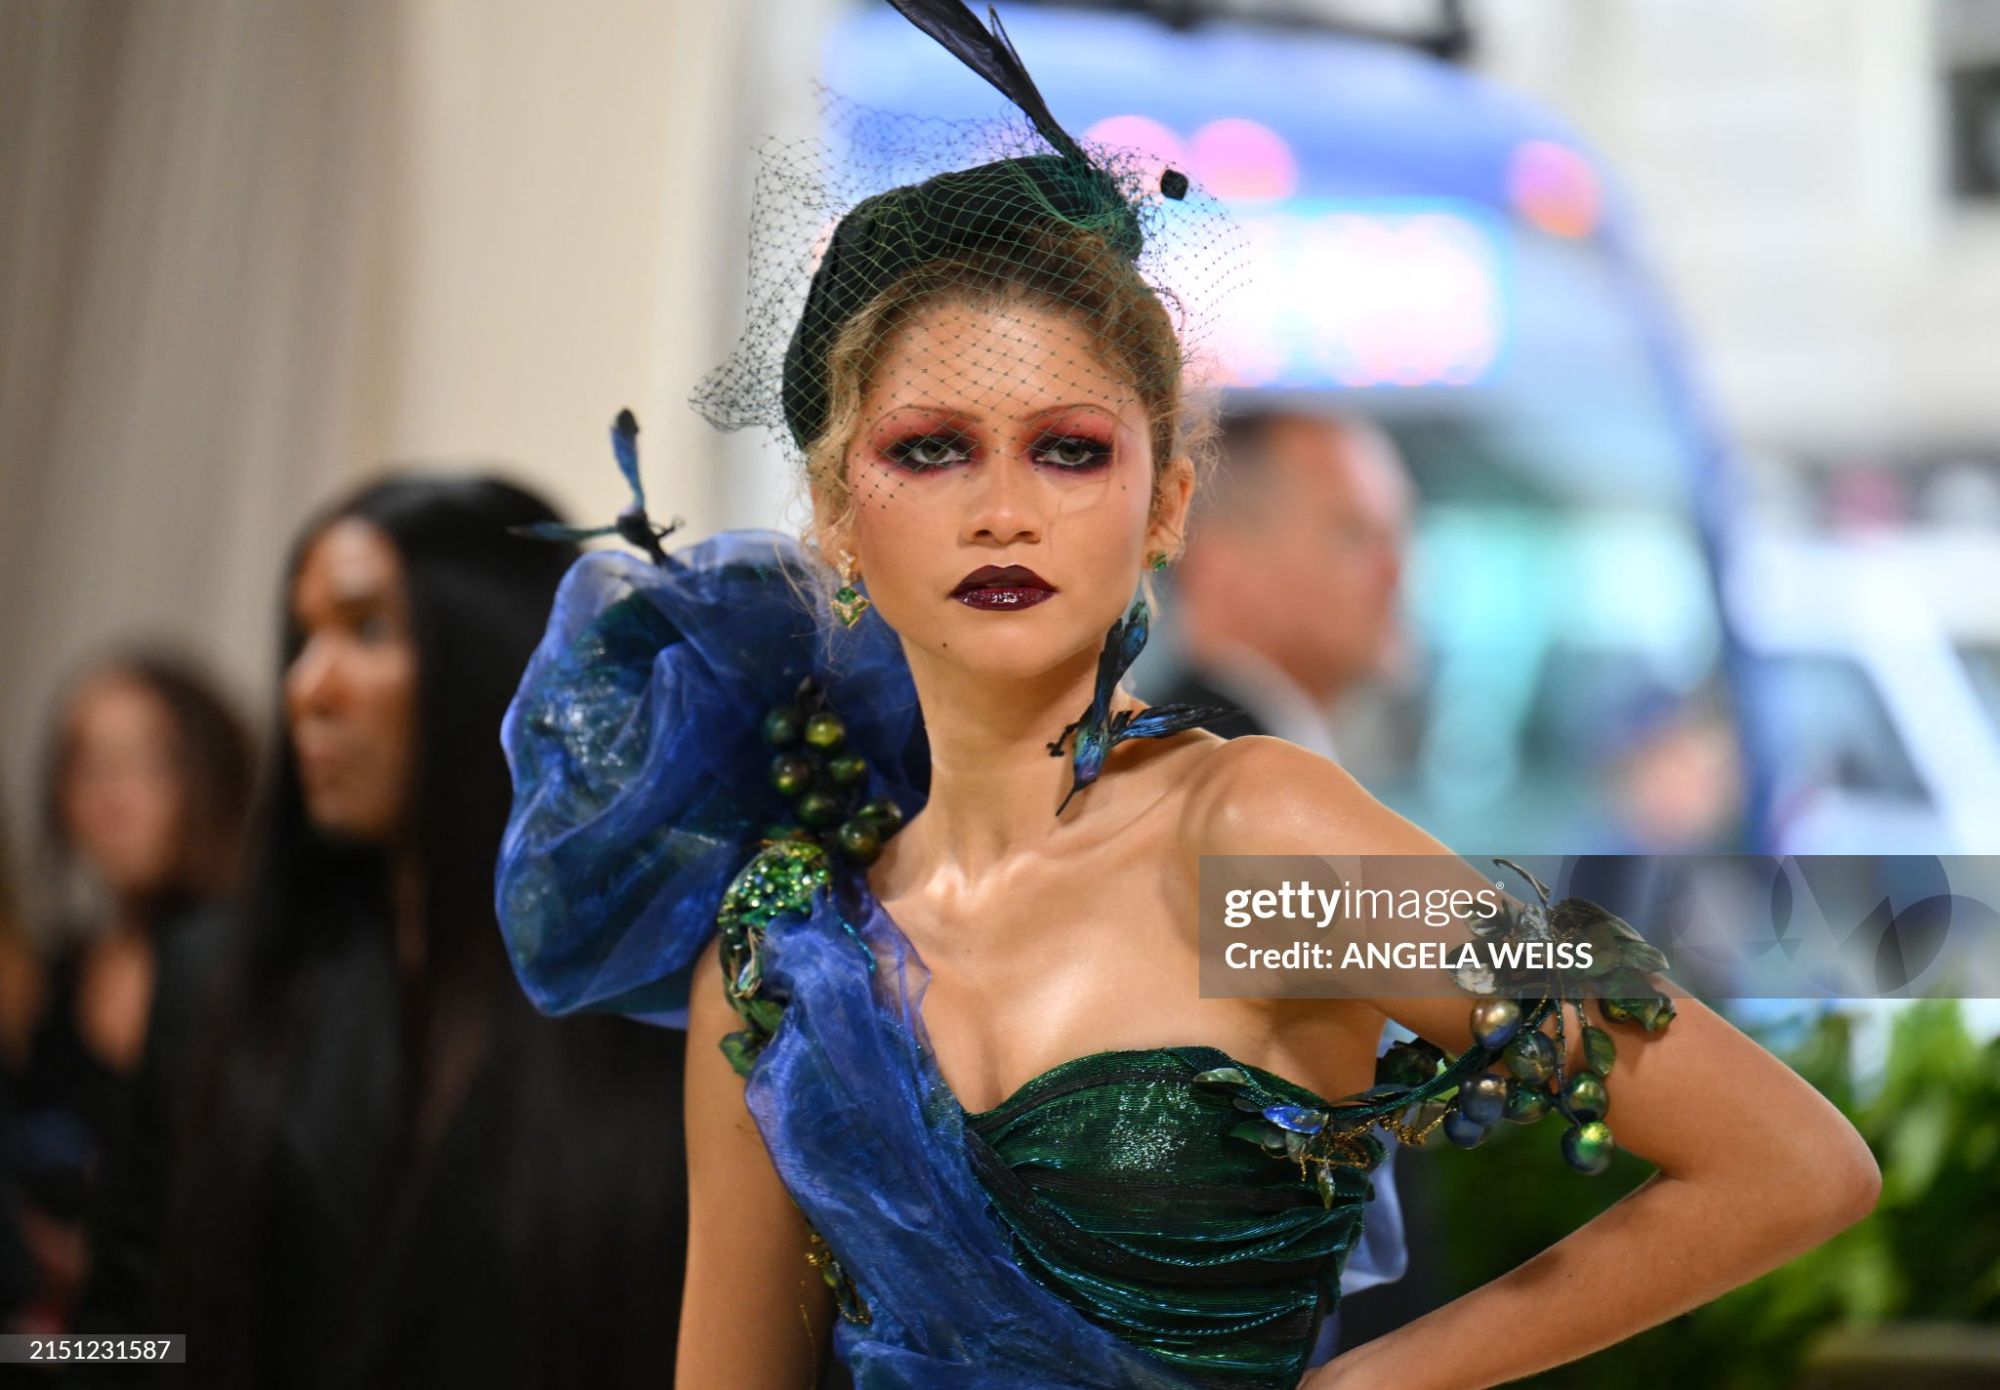 gettyimages-2151231587-2048x2048.jpg